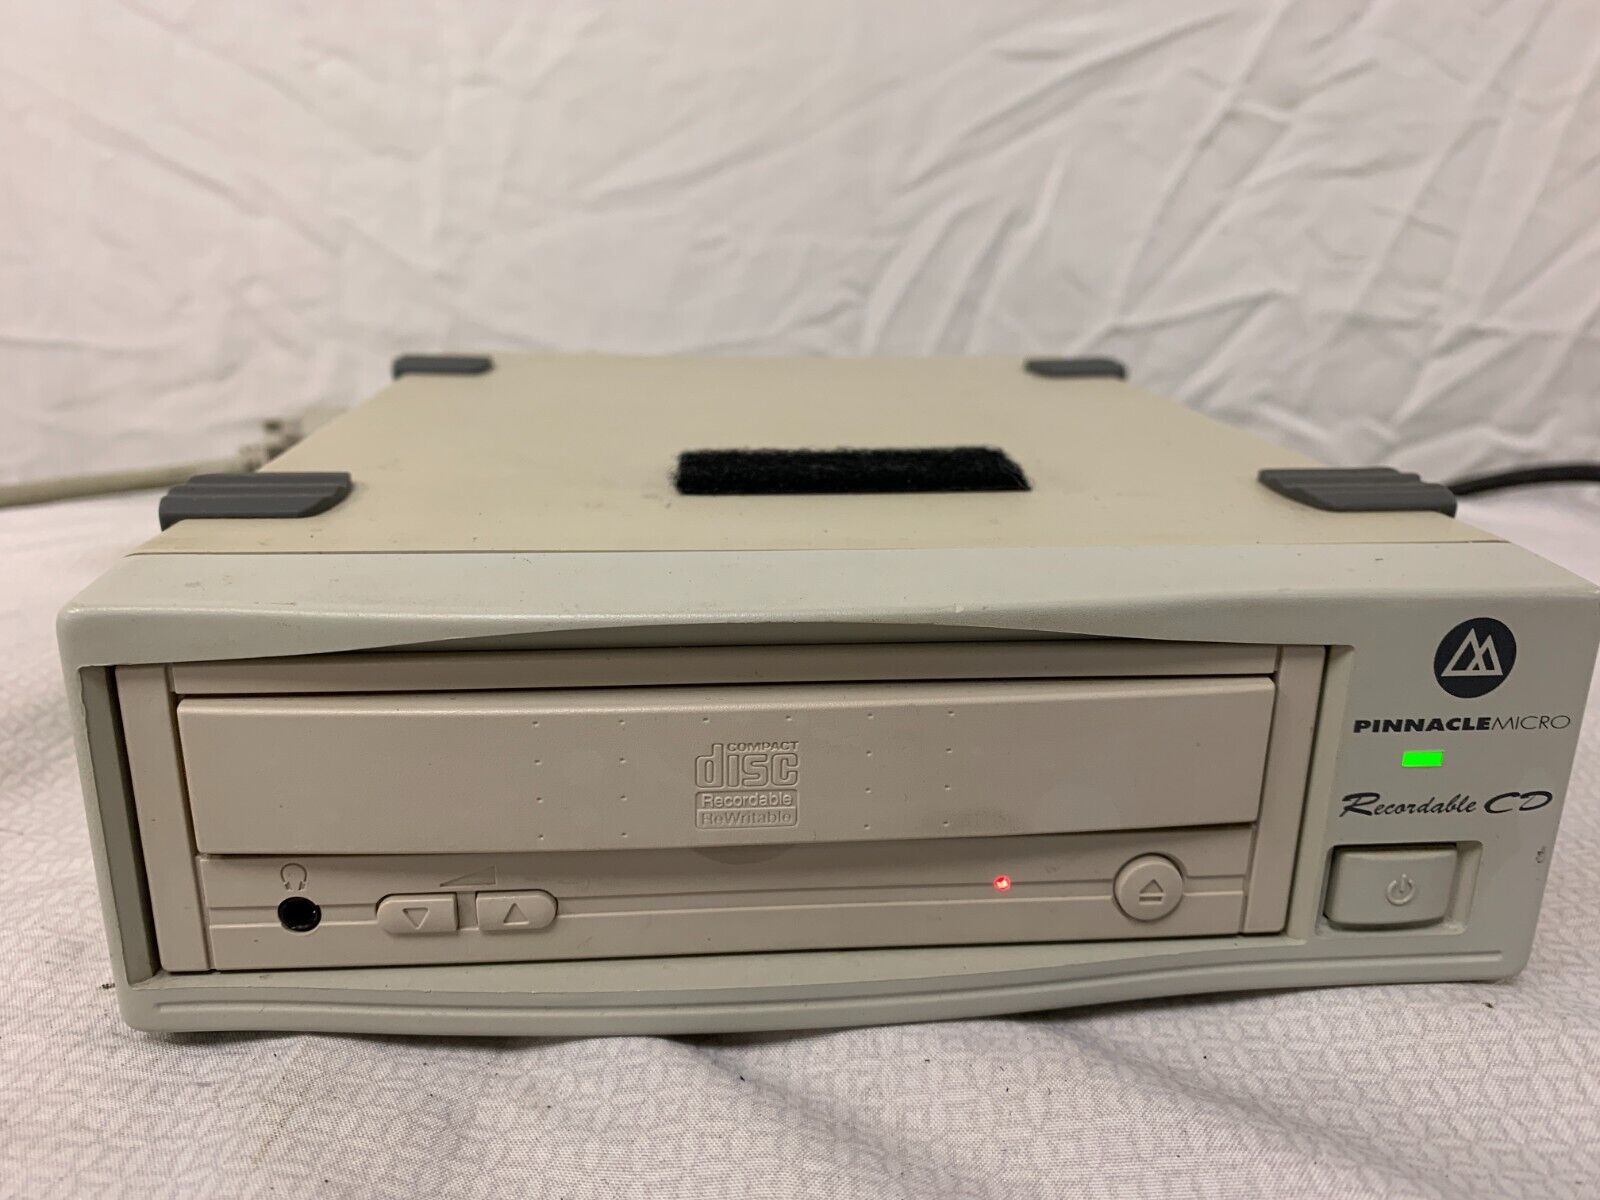 Vintage Pinnacle Micro  Scsi cd player for MPC 2000XL and samplers w/2 Cables